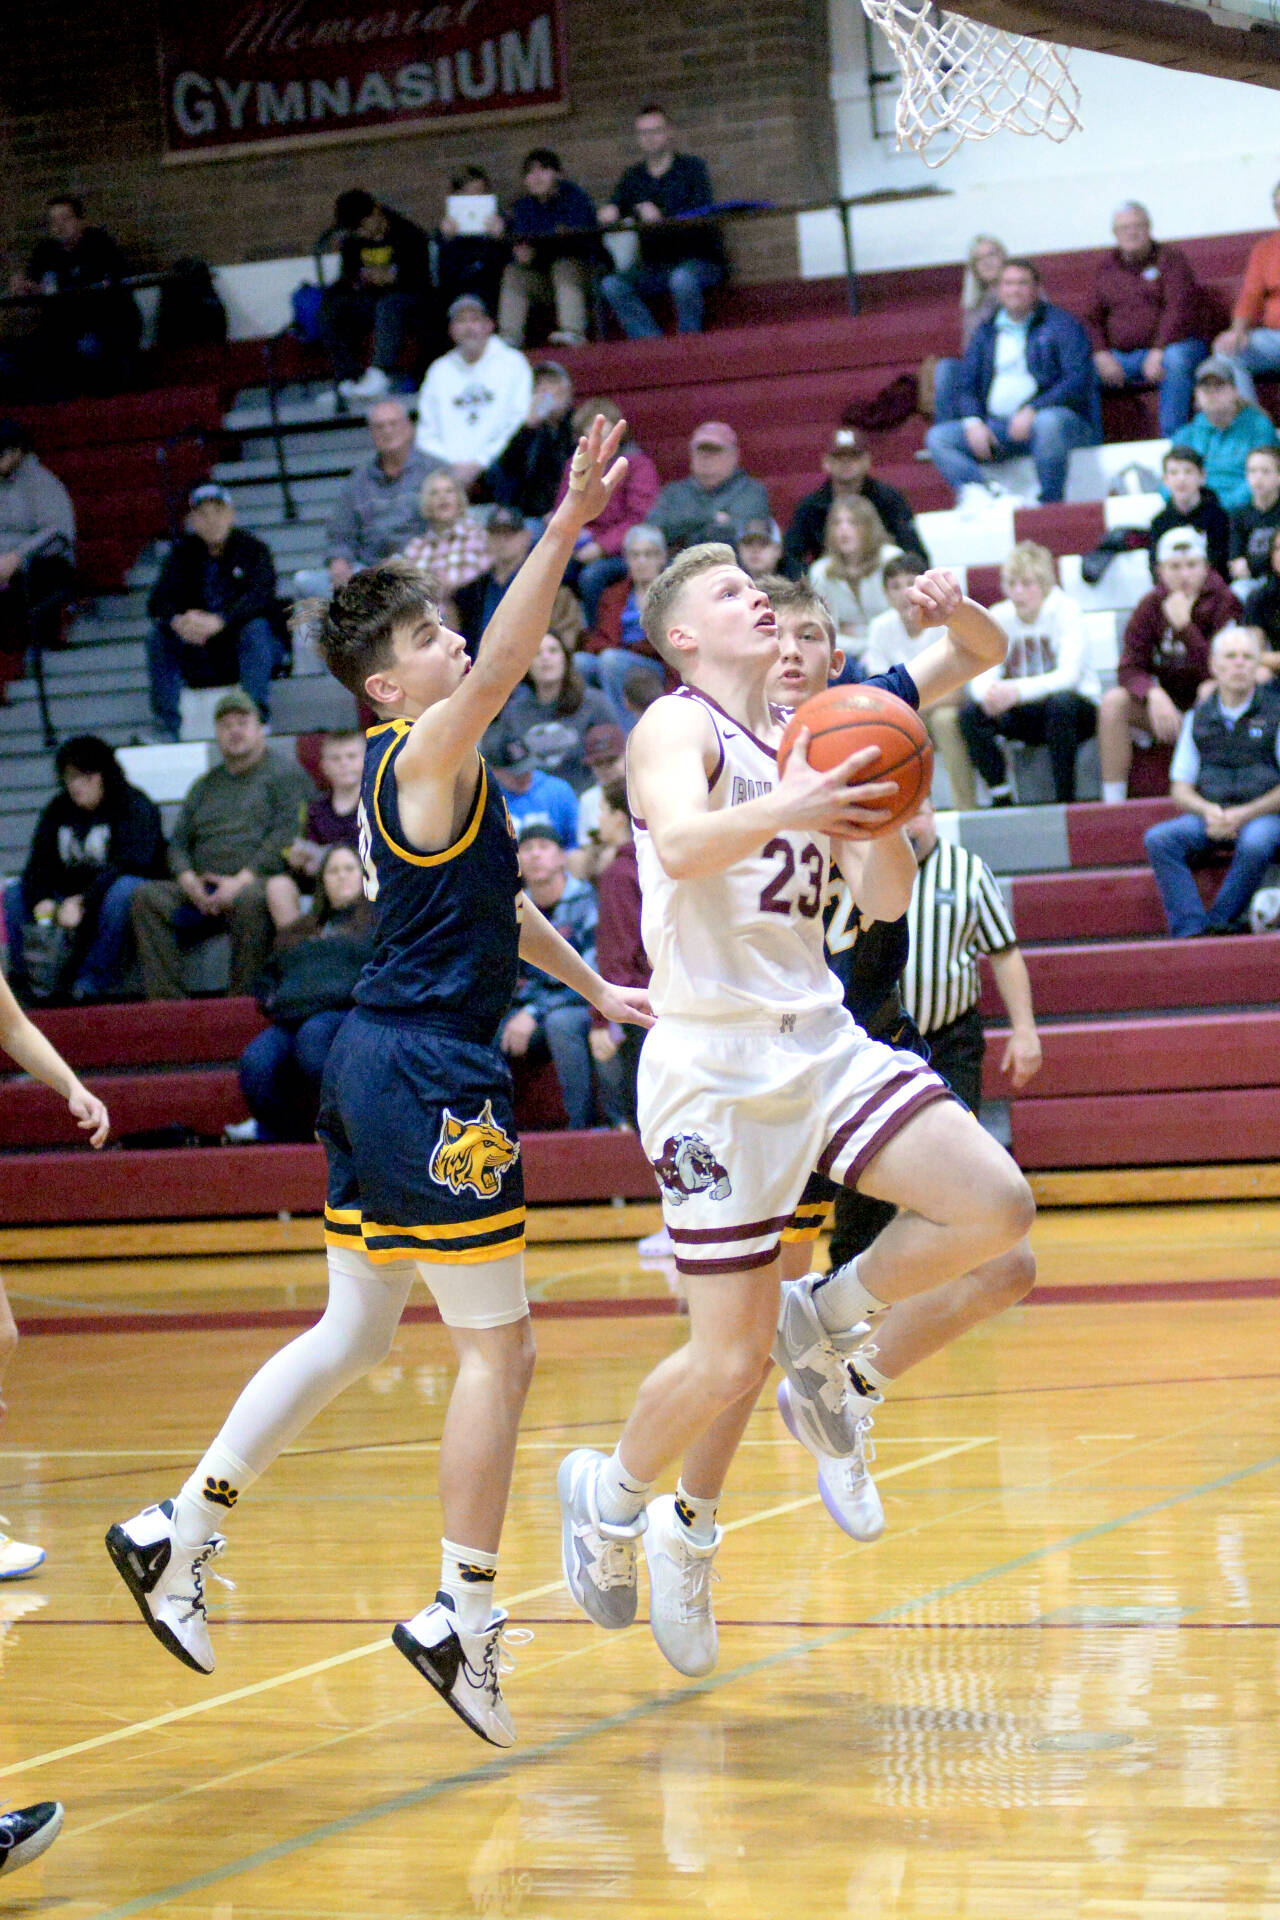 RYAN SPARKS | THE DAILY WORLD Montesano junior Tyce Peterson (23) glides to the basket against Aberdeen’s Patrick Walsh during the Bulldogs’ 45-37 victory on Friday in Montesano.